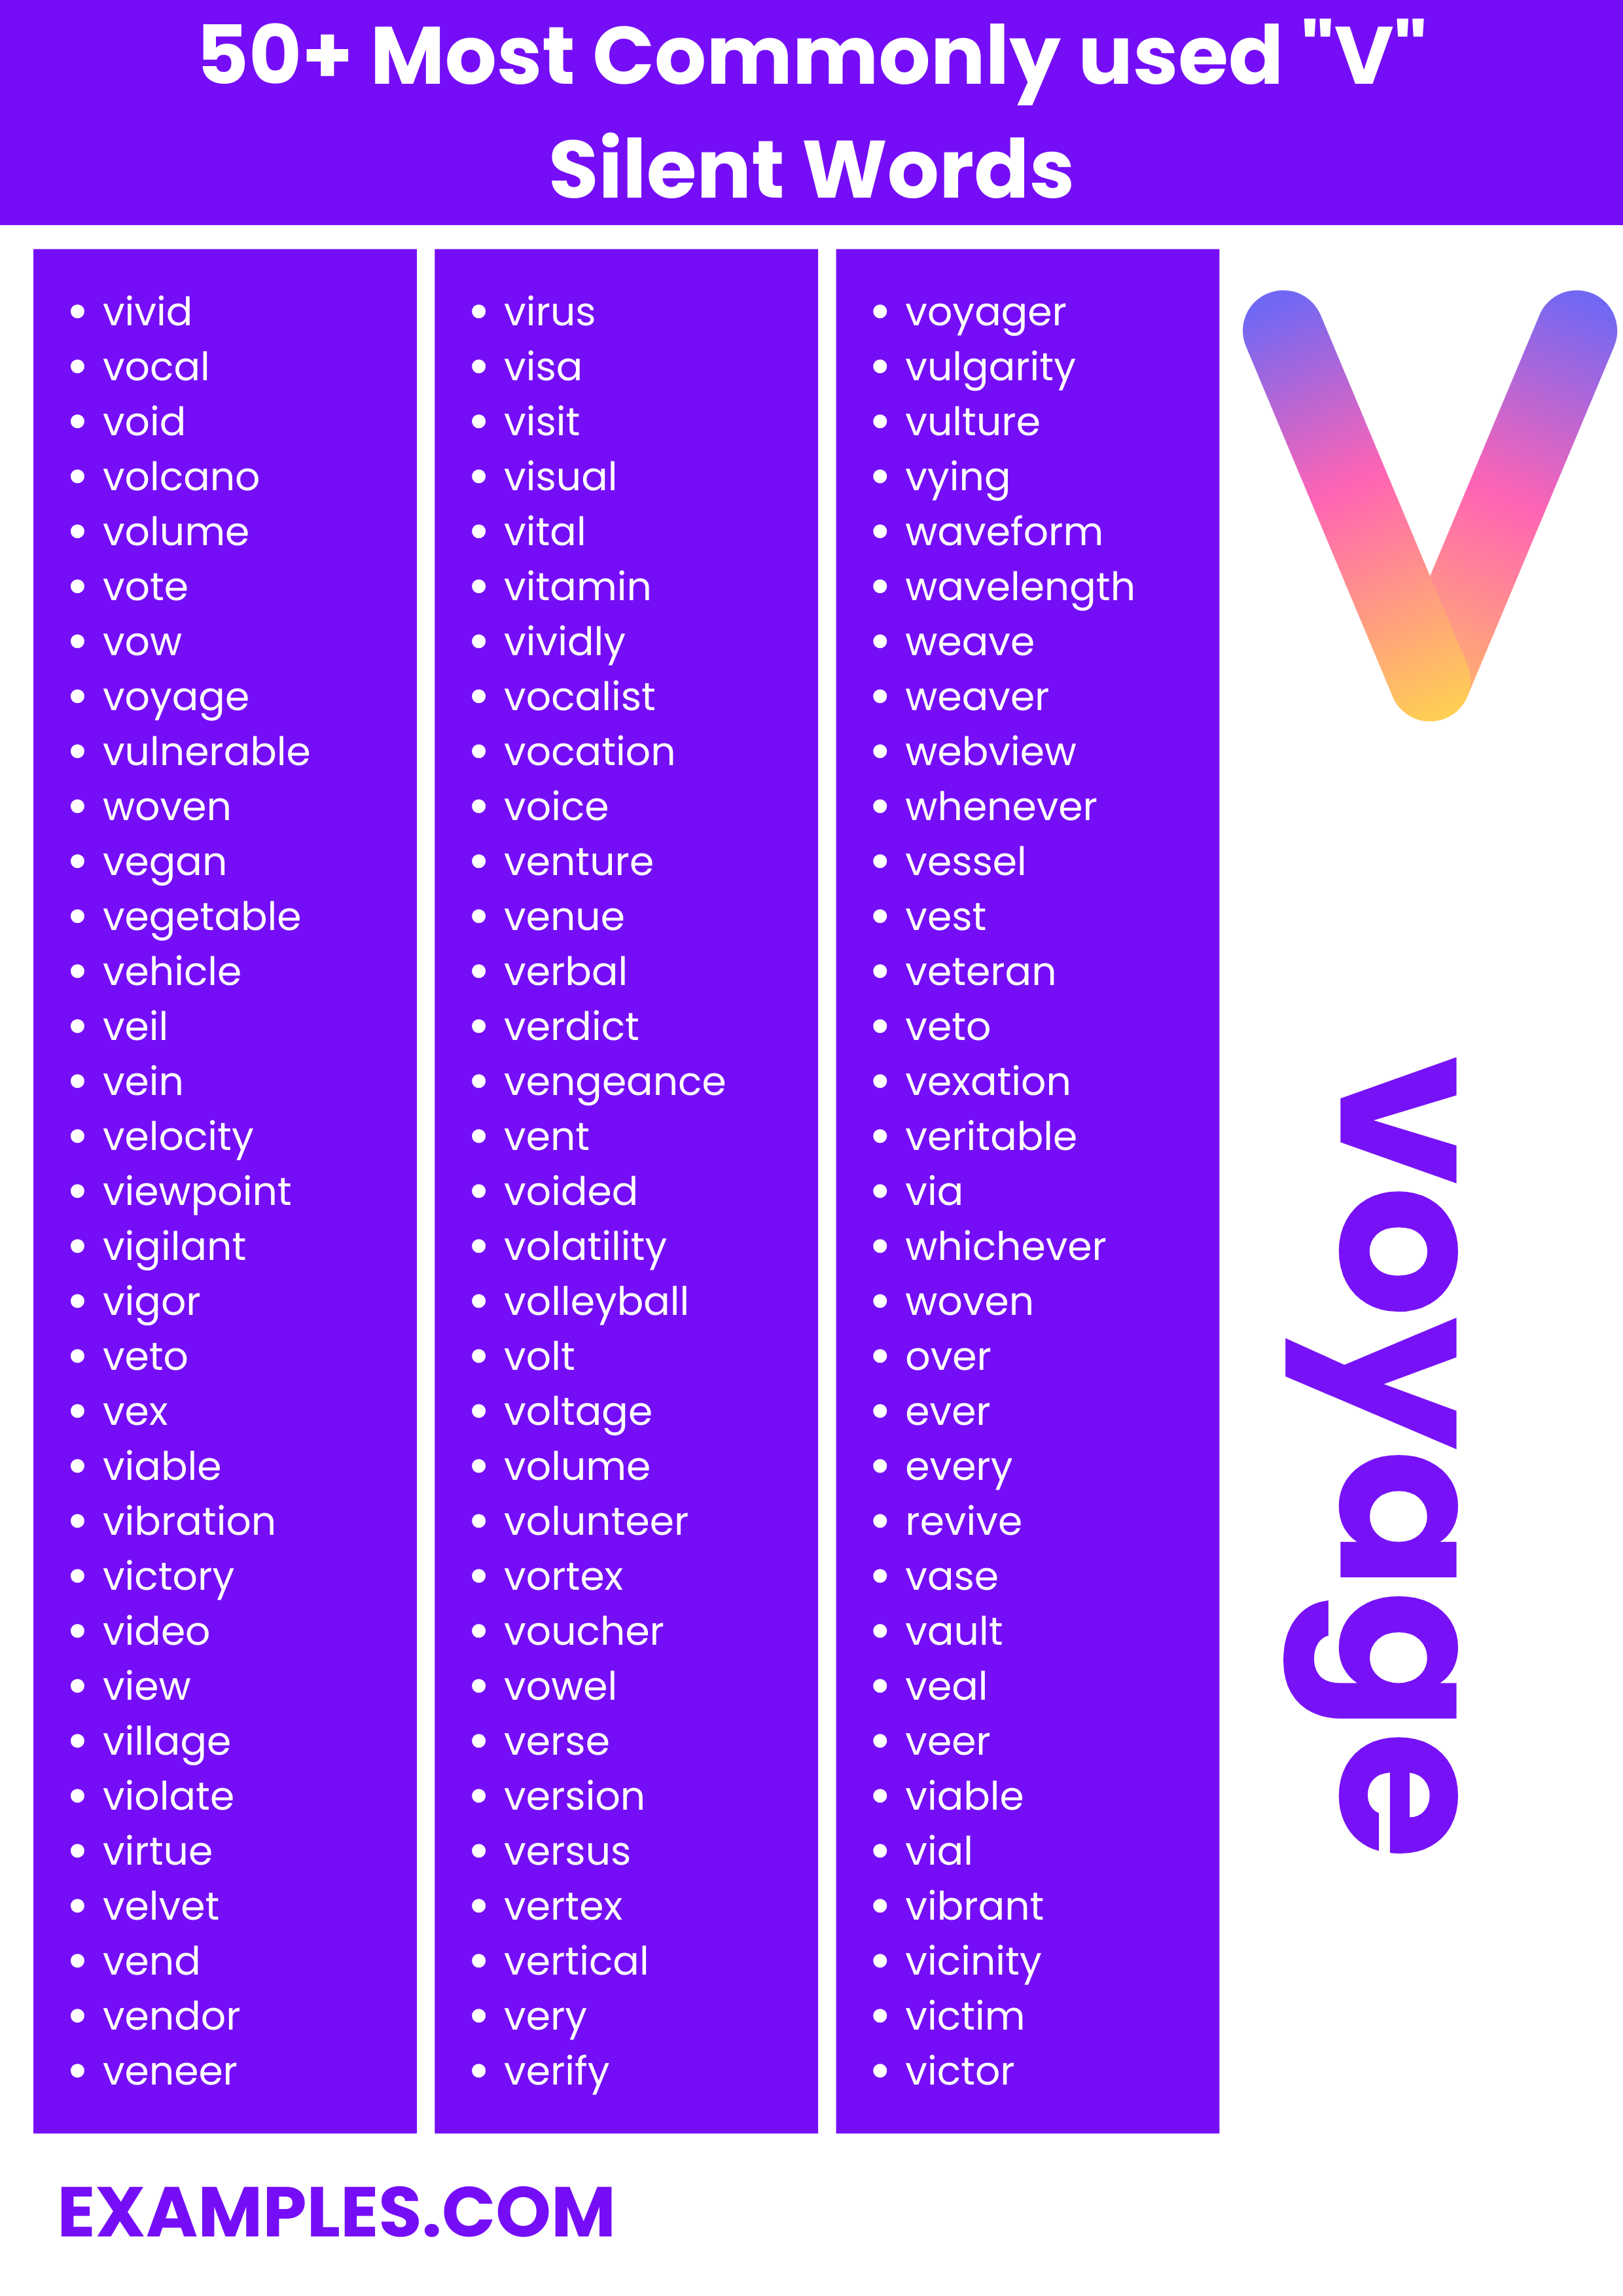 50 most commonly used v silent words